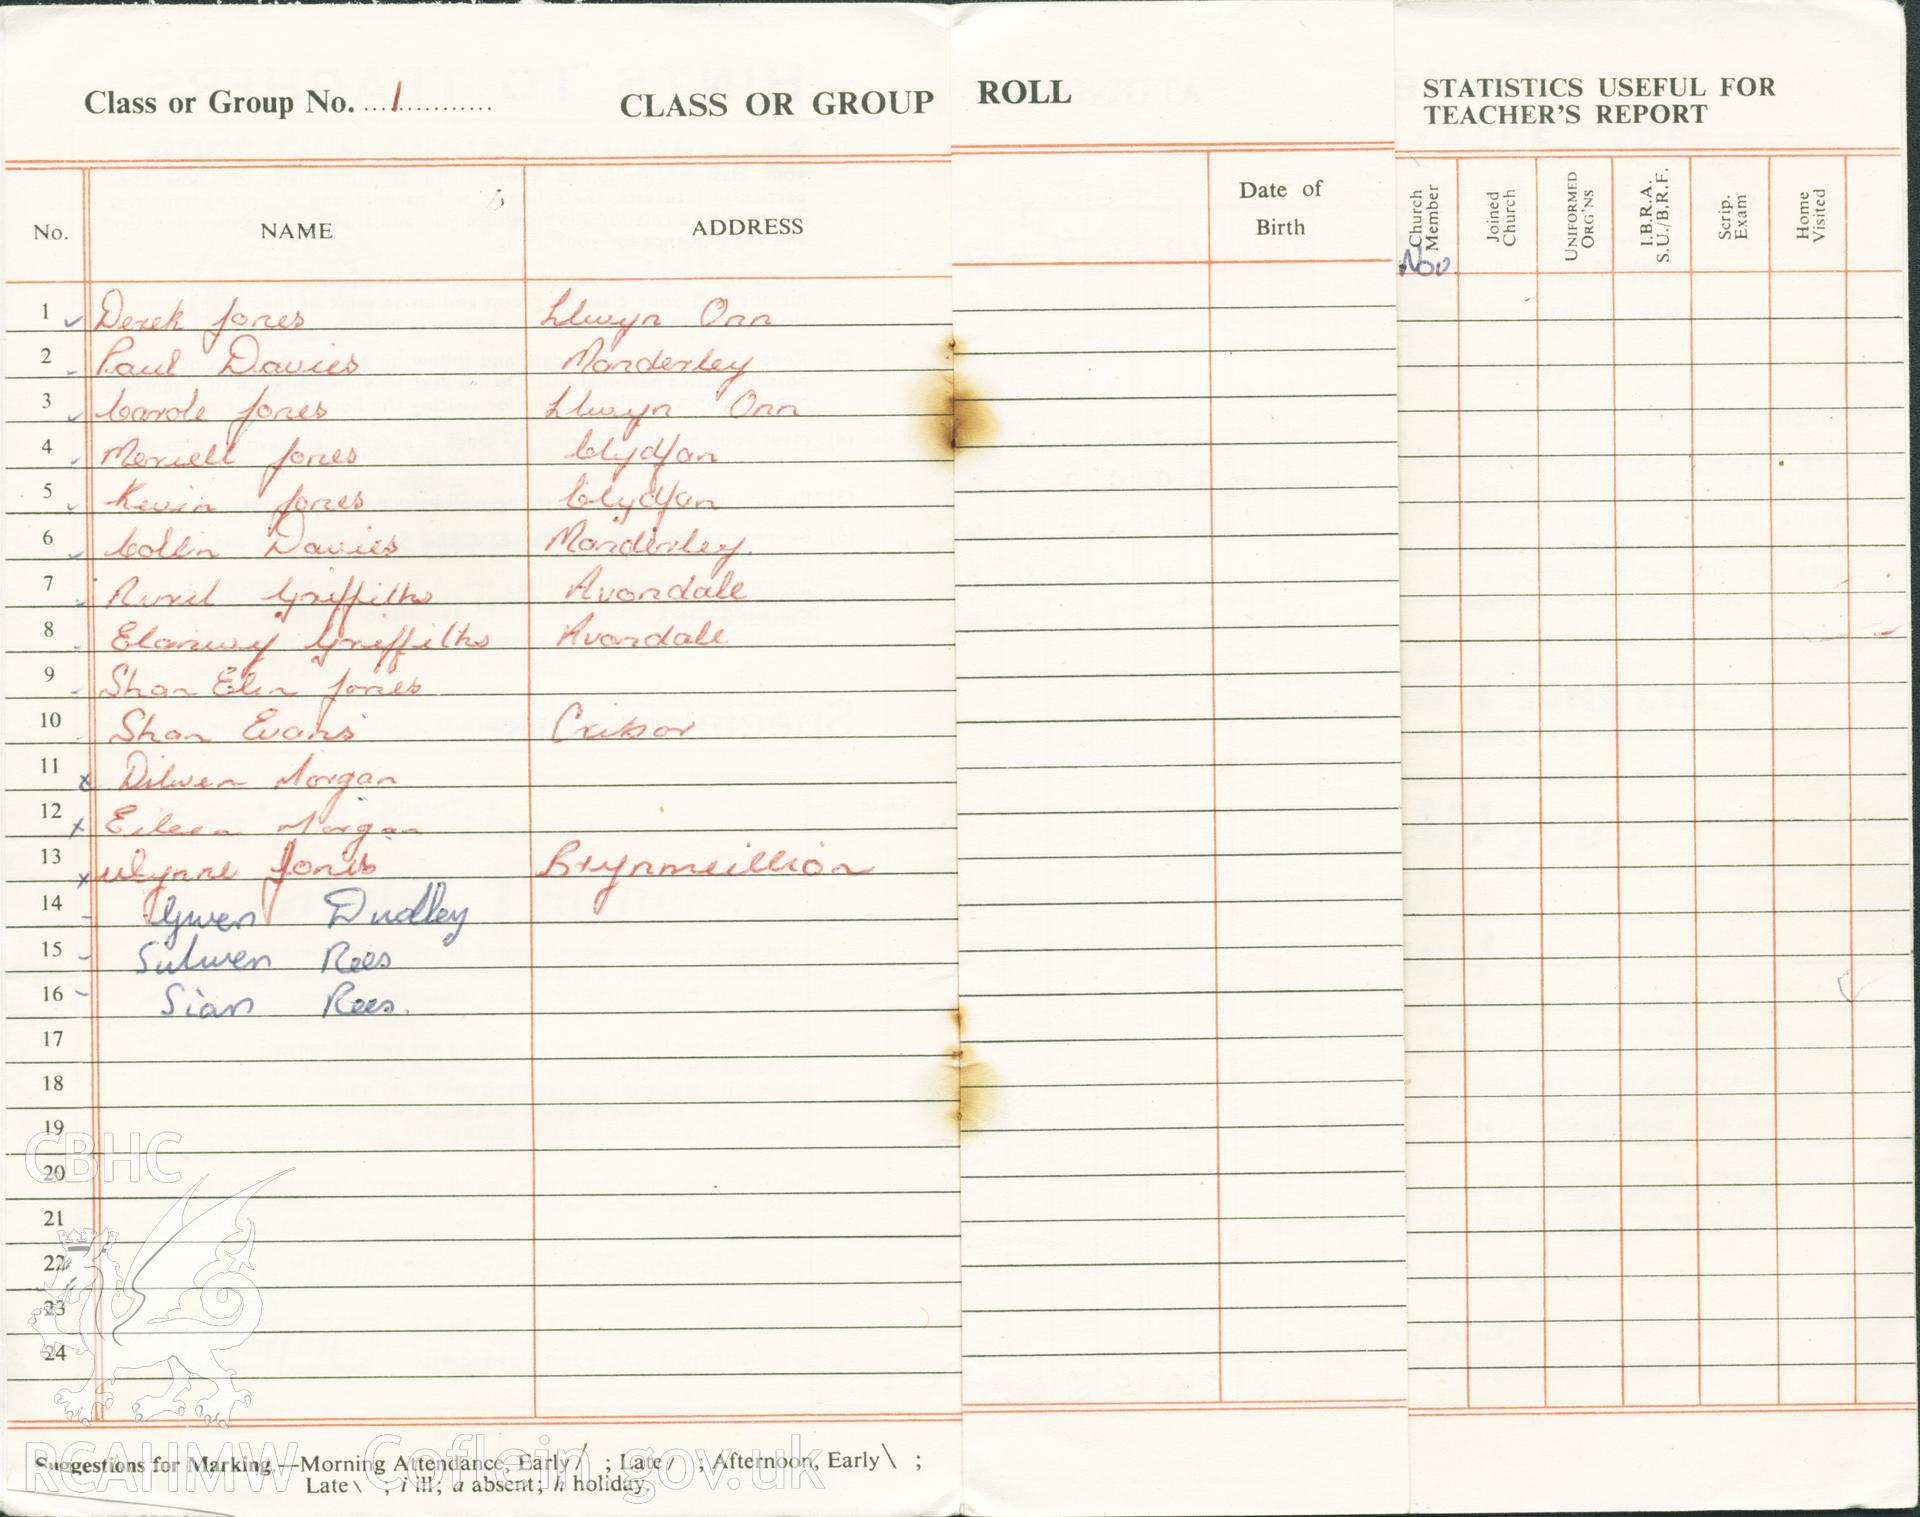 Llwynrhydowen Sunday School Class register 1967. Donated to the RCAHMW during the Digital Dissent Project.